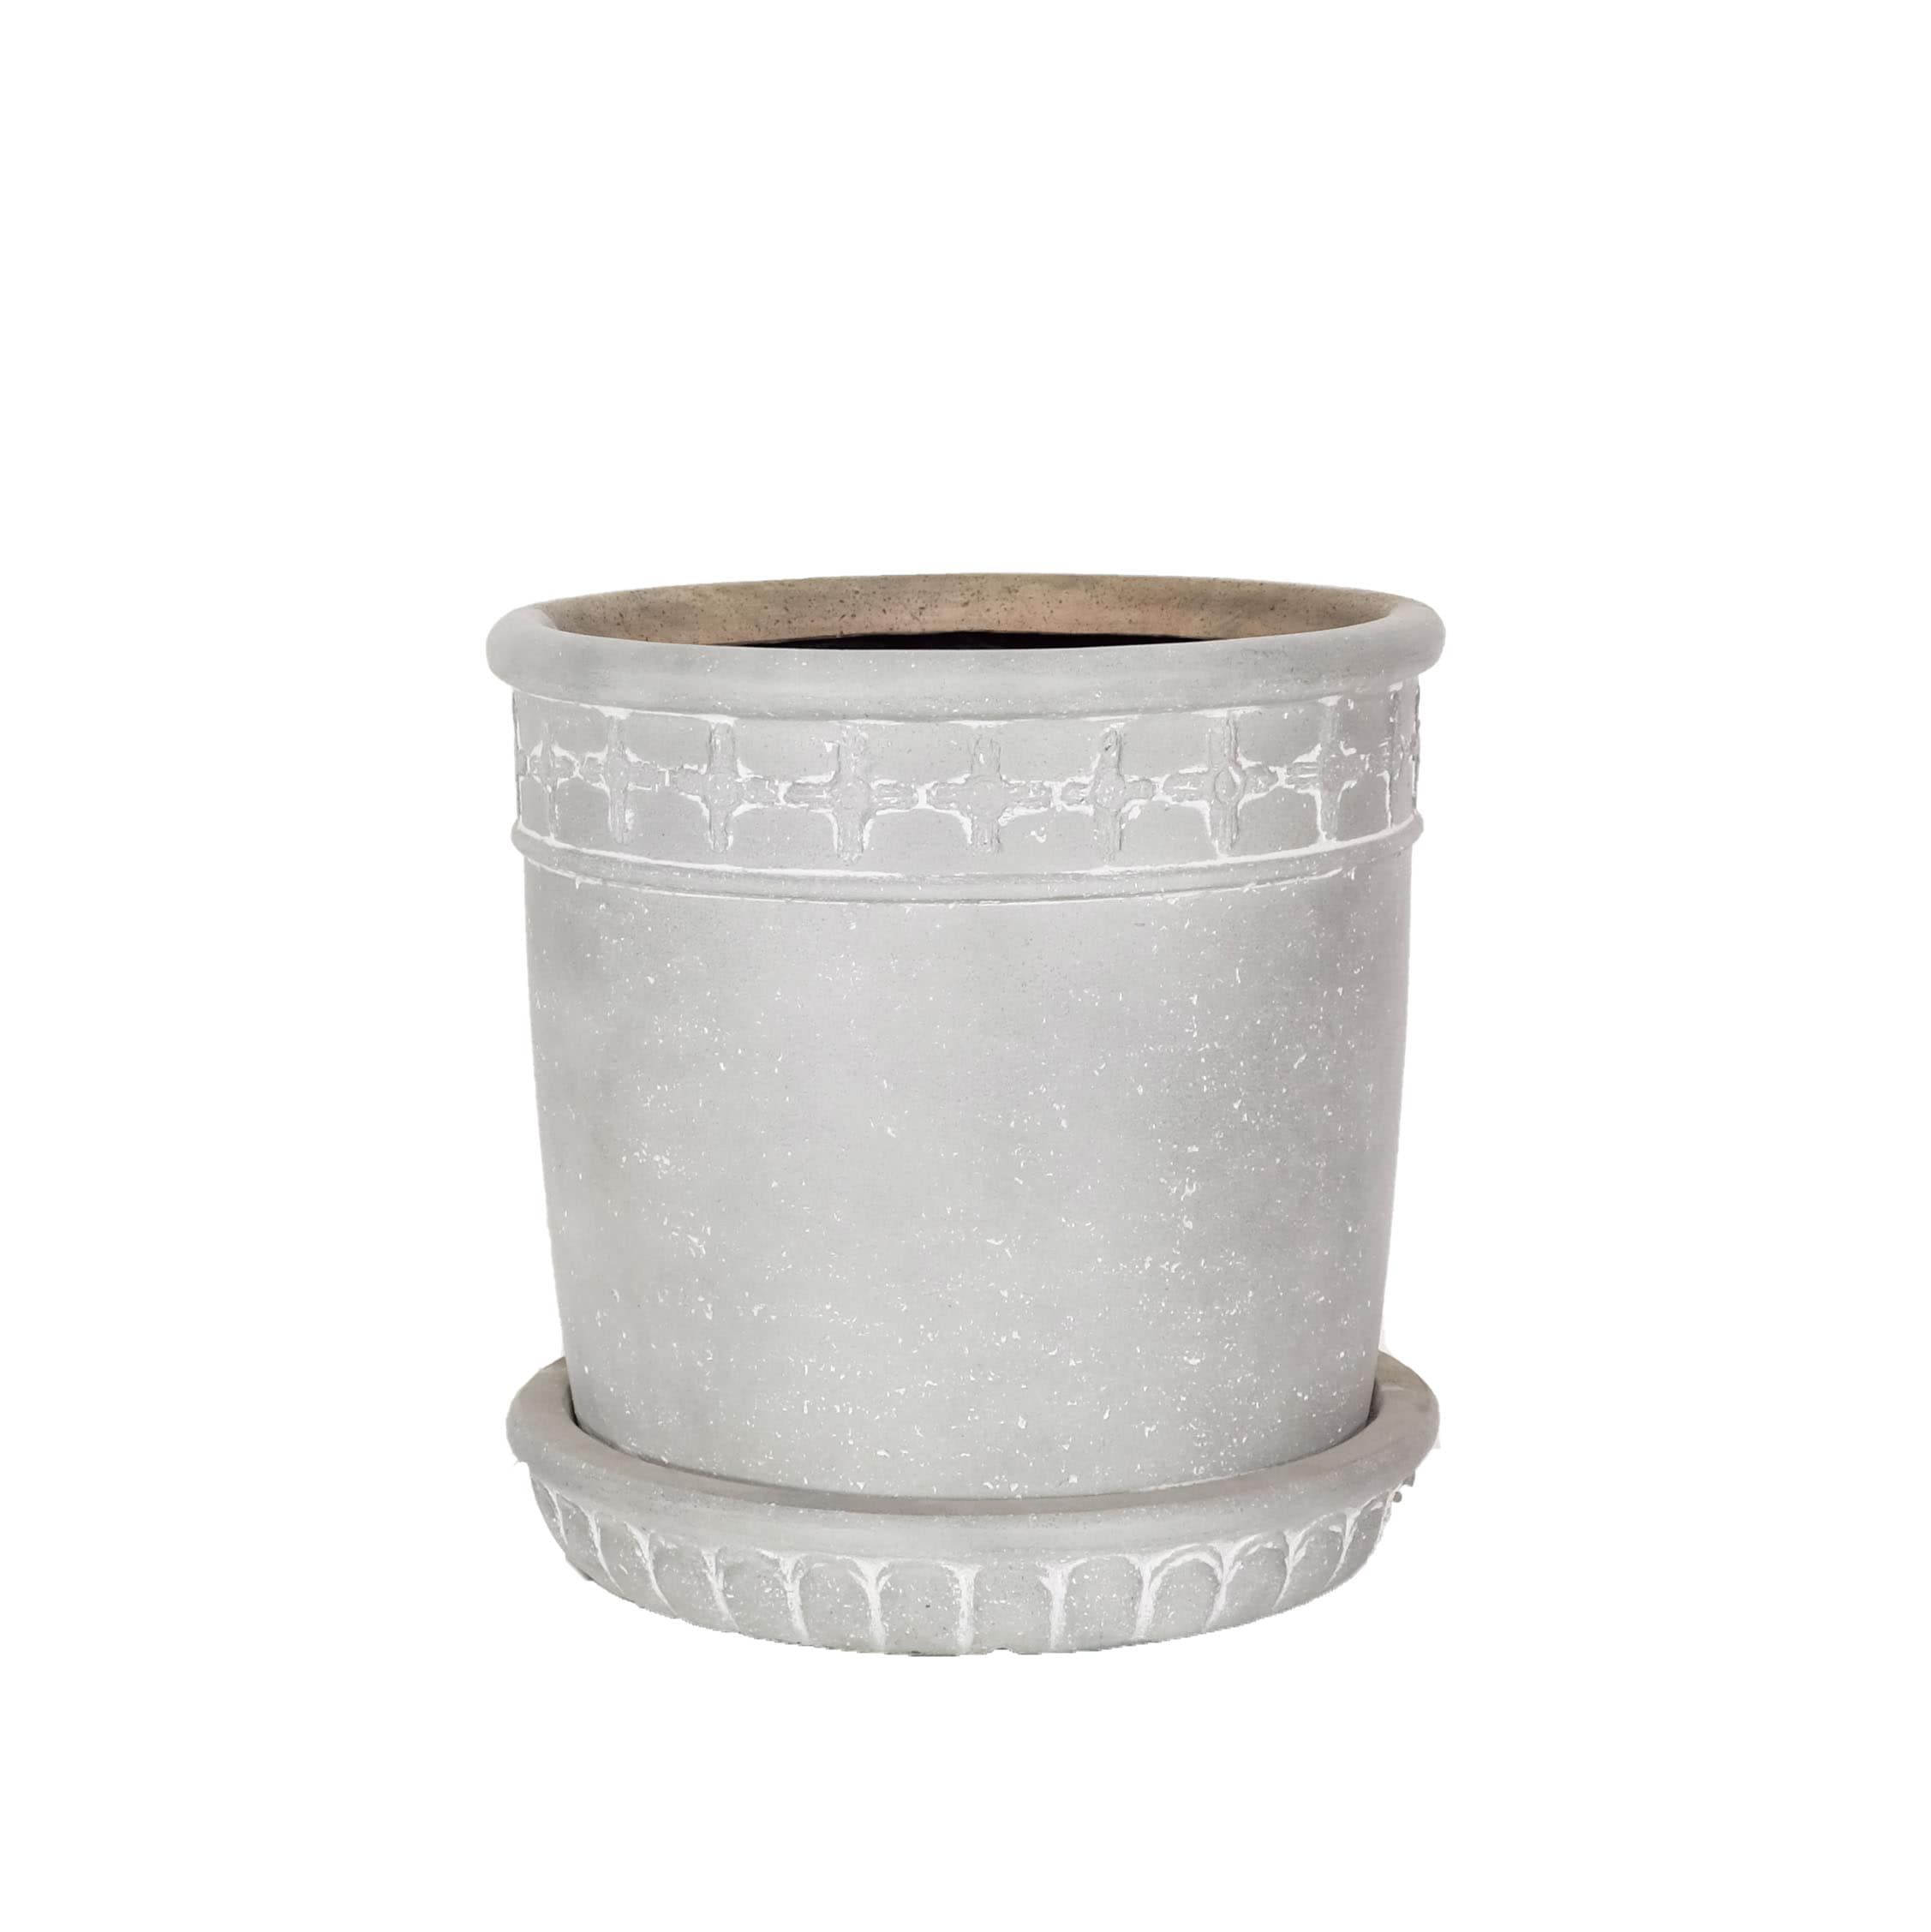 allen + roth 12.75-in x 15-in Whitewash Cement Mixed/Composite Planter with Drainage Holes | Lowe's